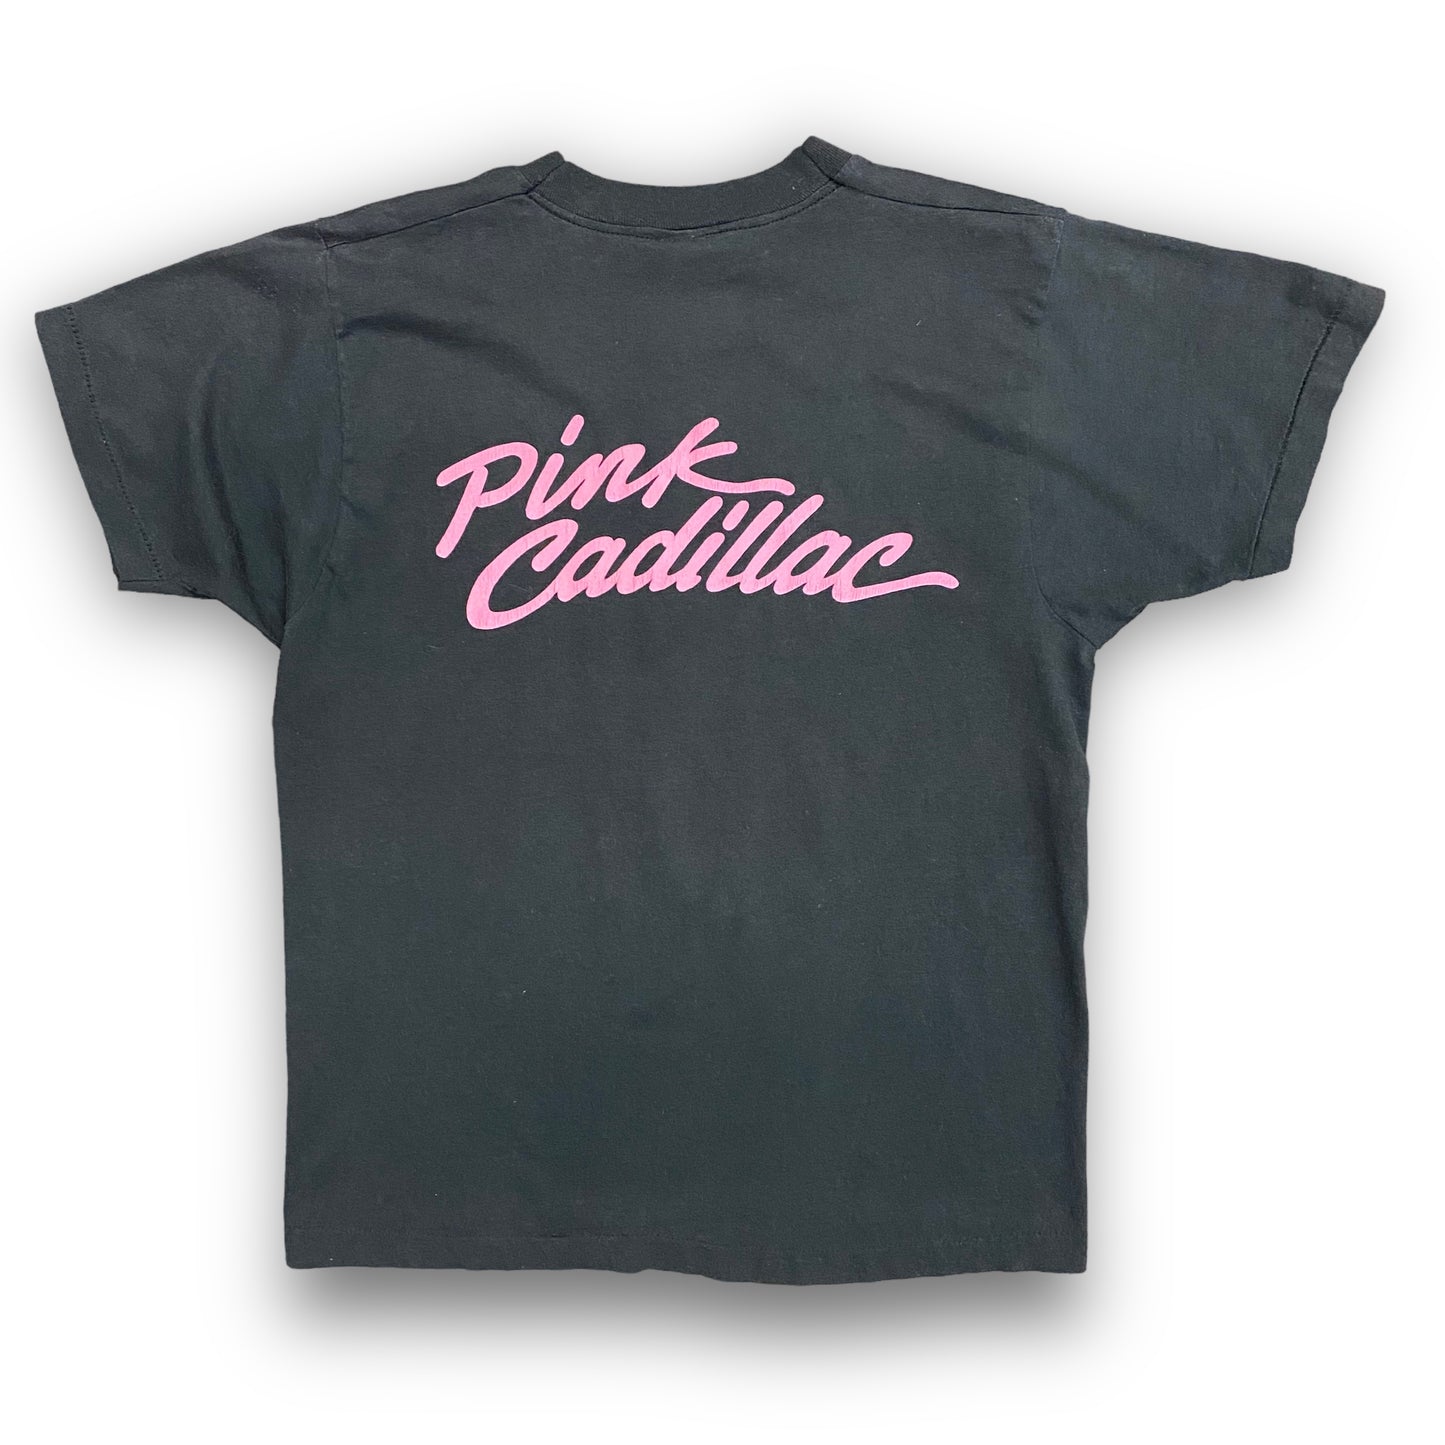 1980s Pink Cadillac Elvis Presley Single Stitch Tee - Size Large